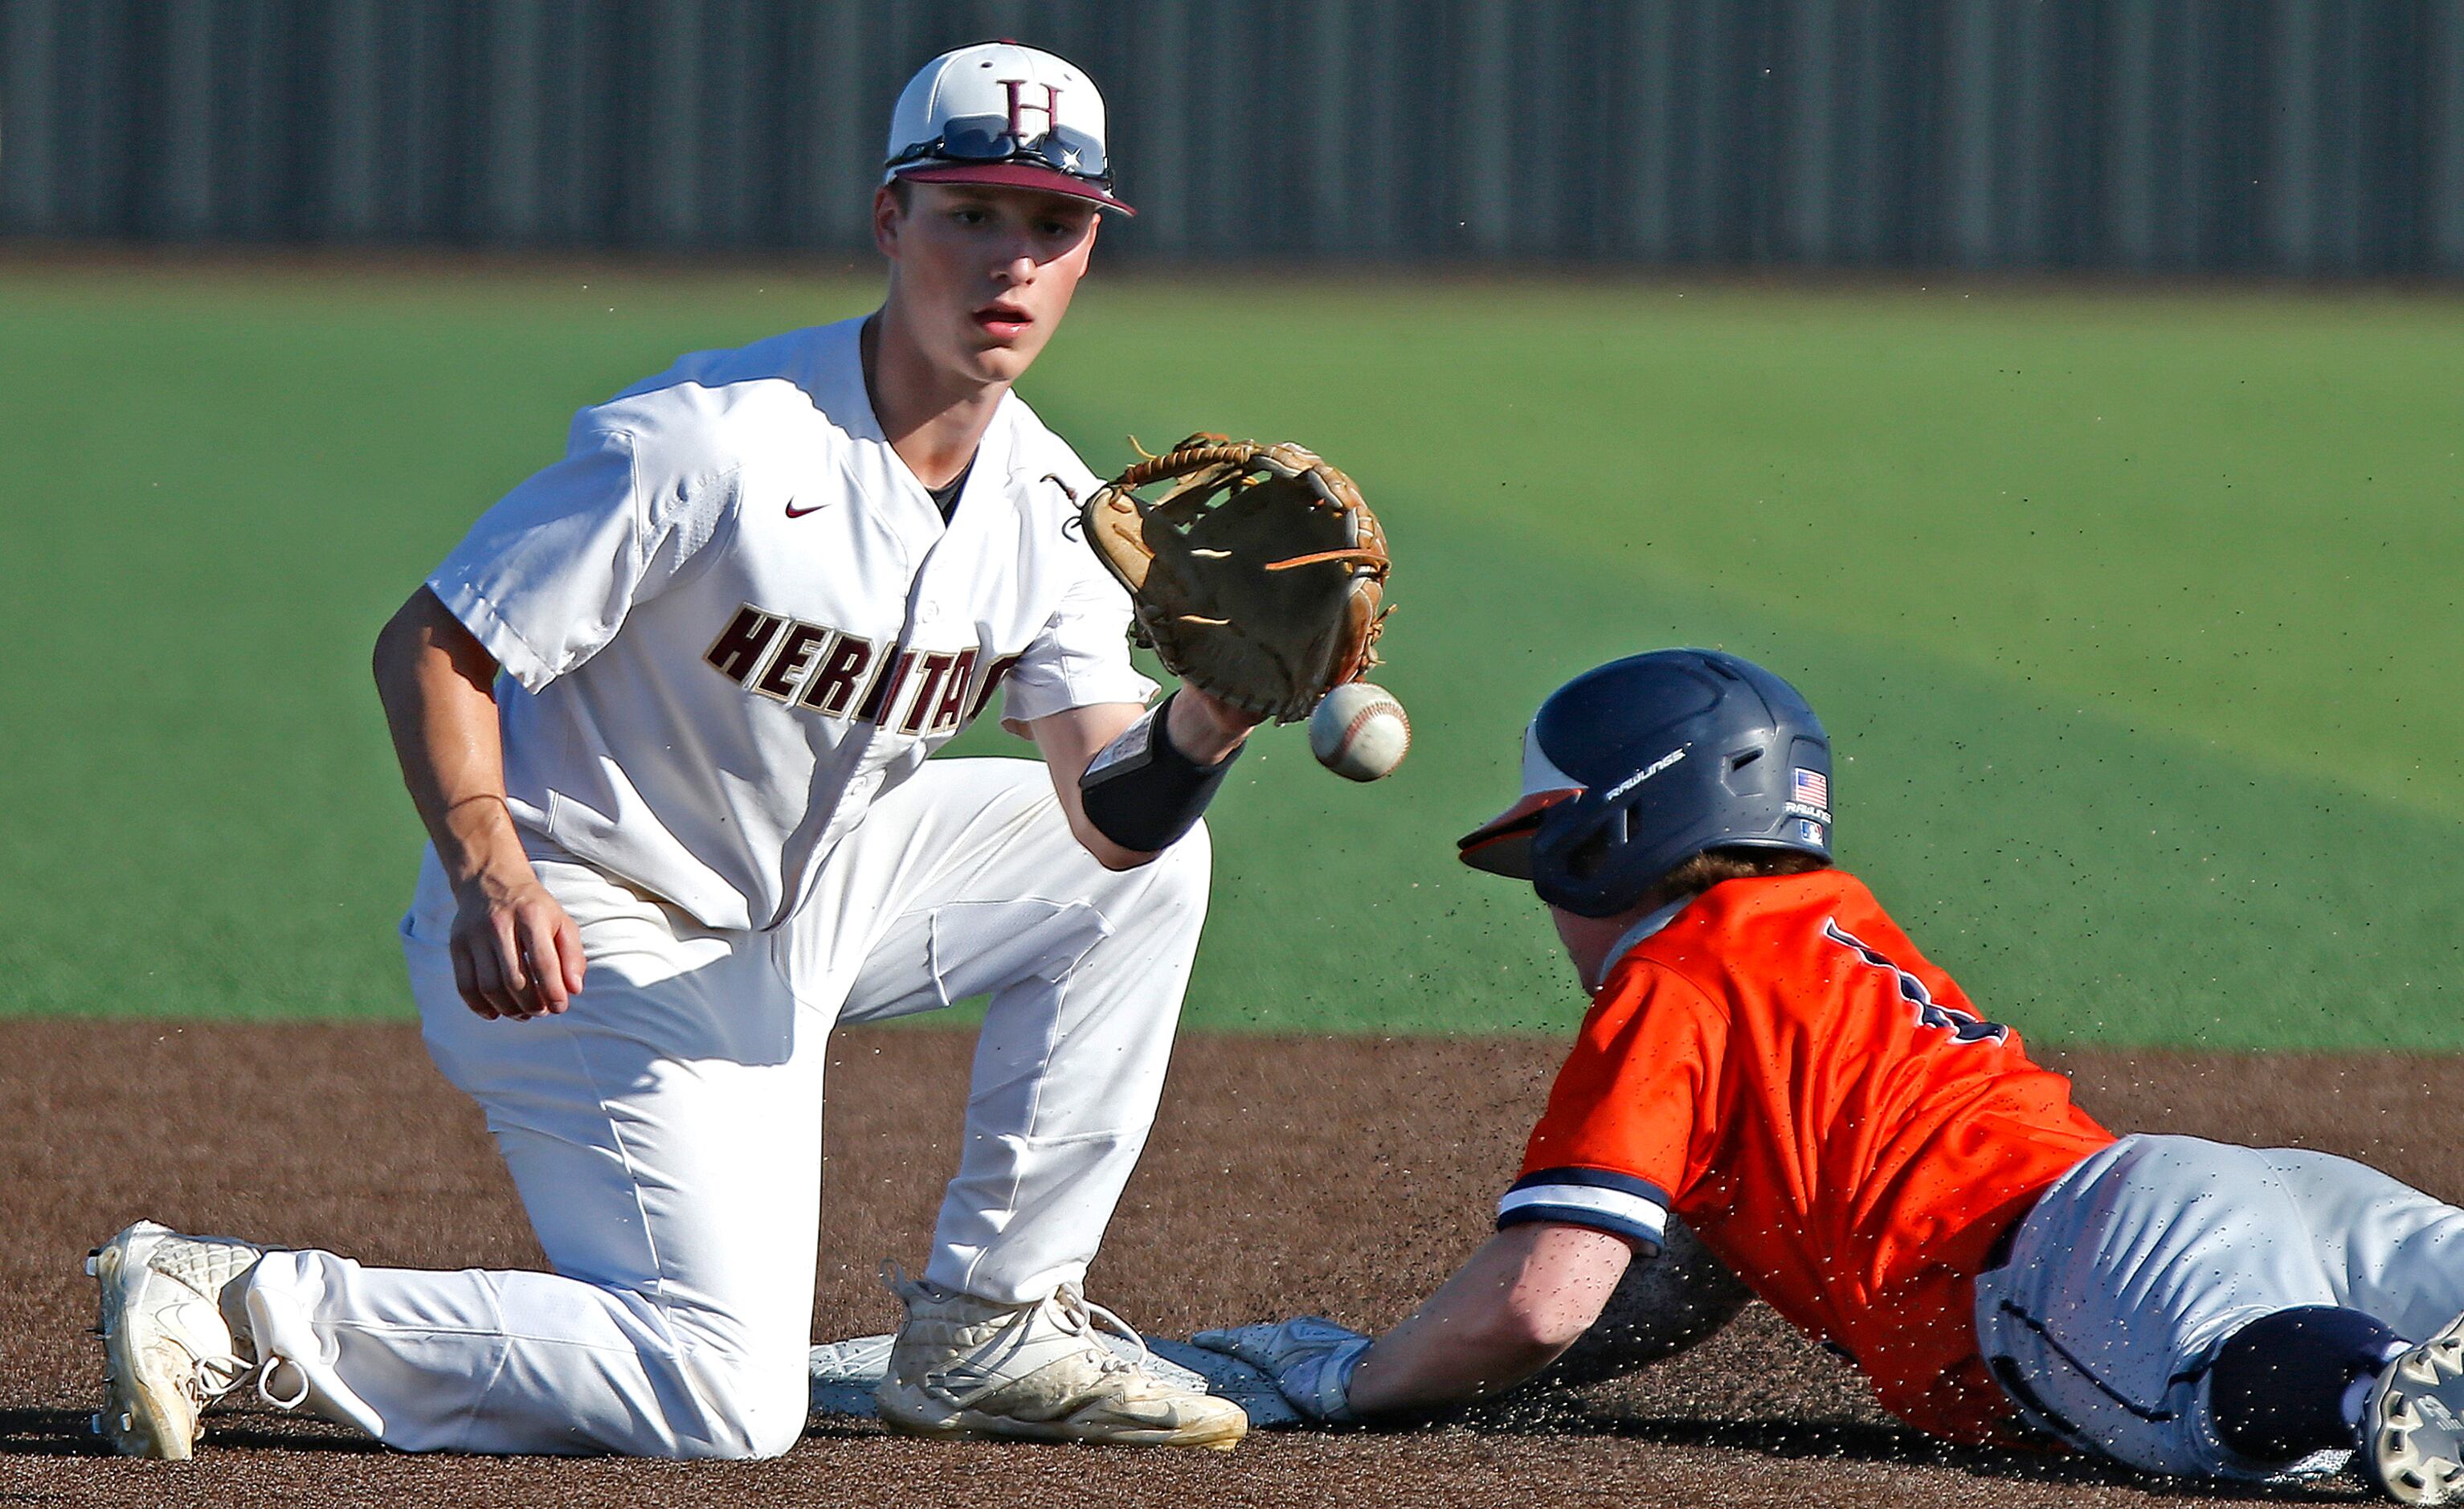 Heritage shortstop Mason Wilson (2) wsn’t able to get the tag on as Wakeland shortstop Conor...